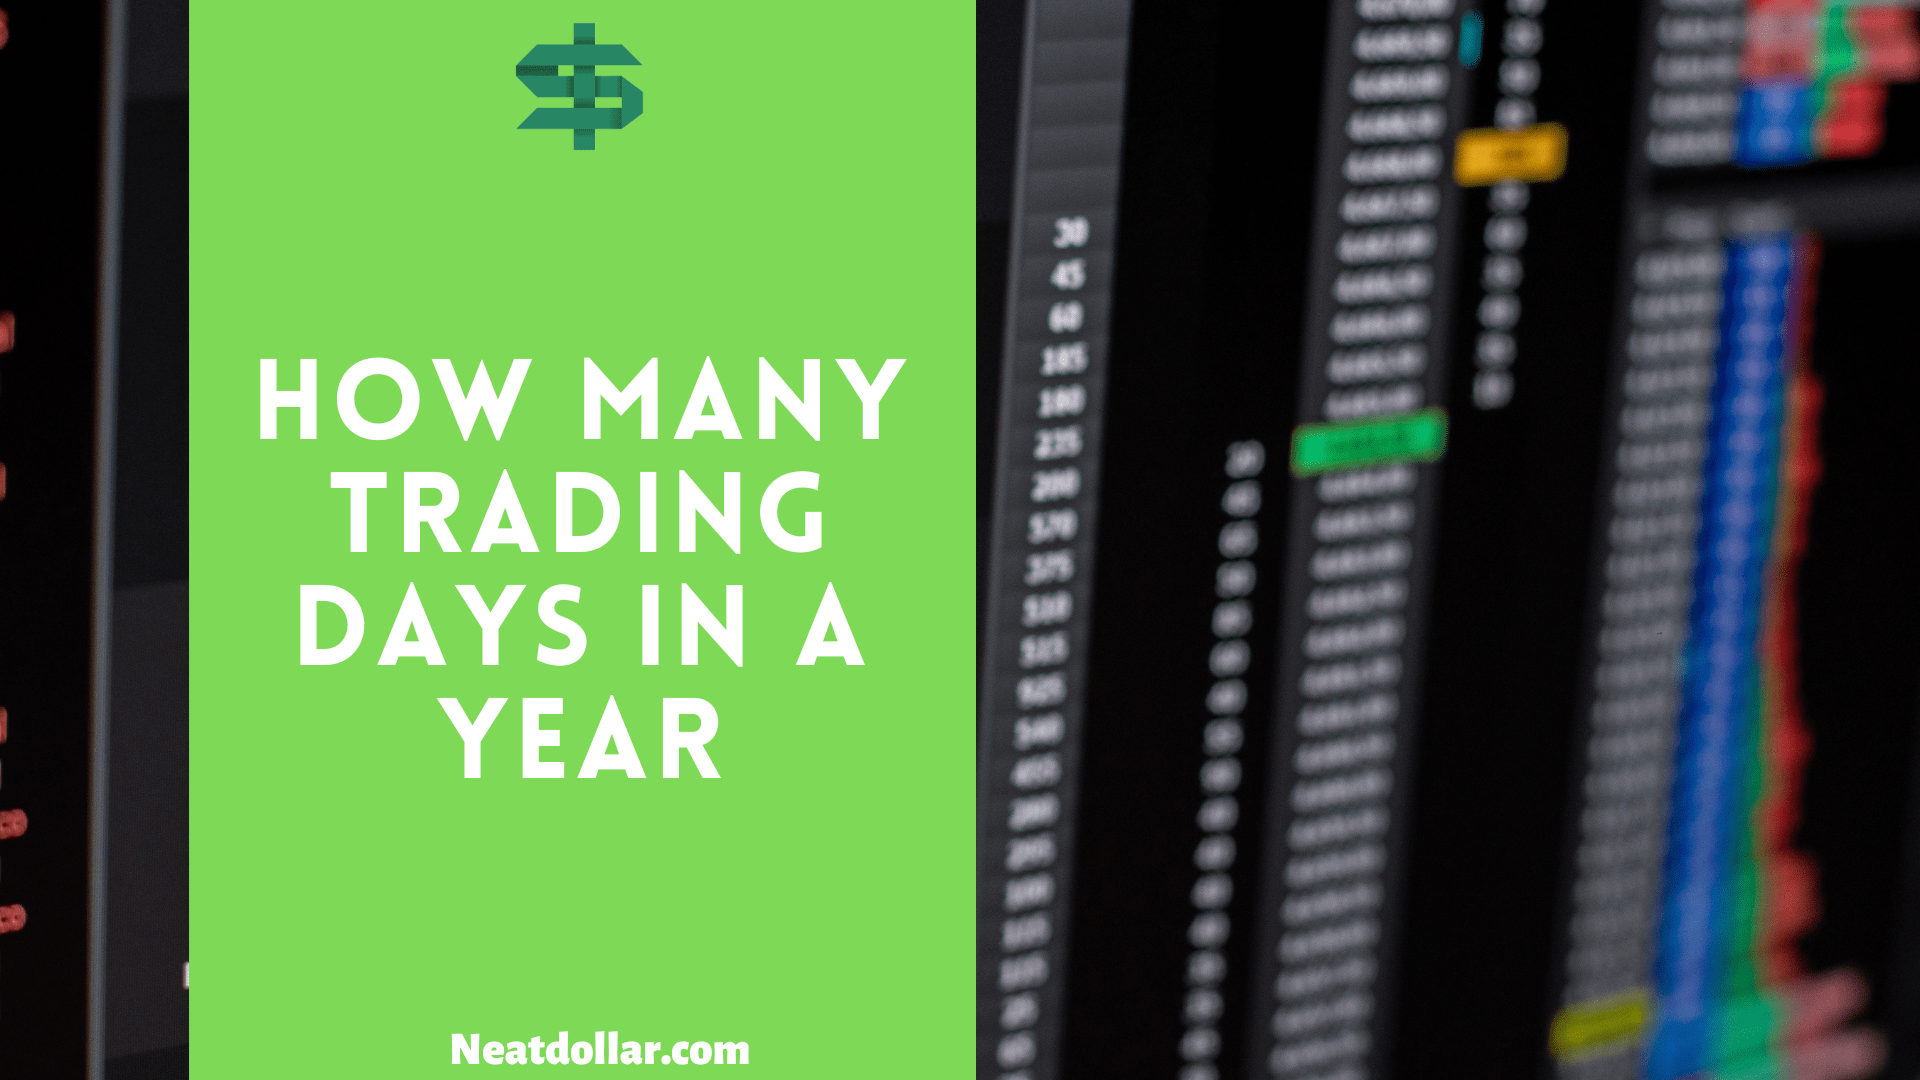 How Many Trading Days in a Year? Neat Dollar